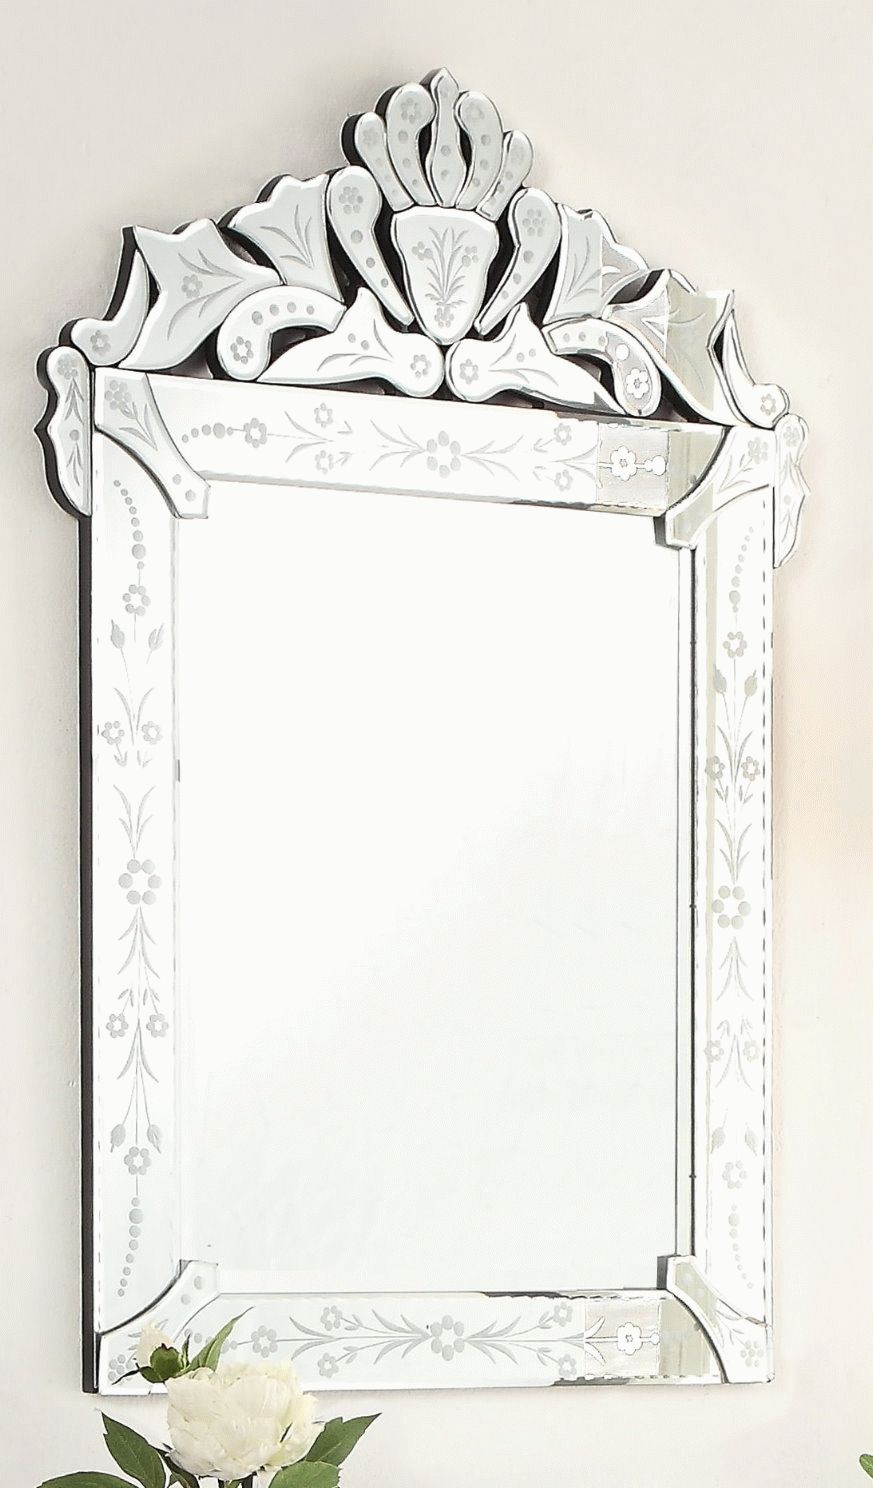 Irsina 25 Inch Venetian Style Wall Mirror Ym 702 2536 For Venetian Style Wall Mirrors (View 5 of 25)